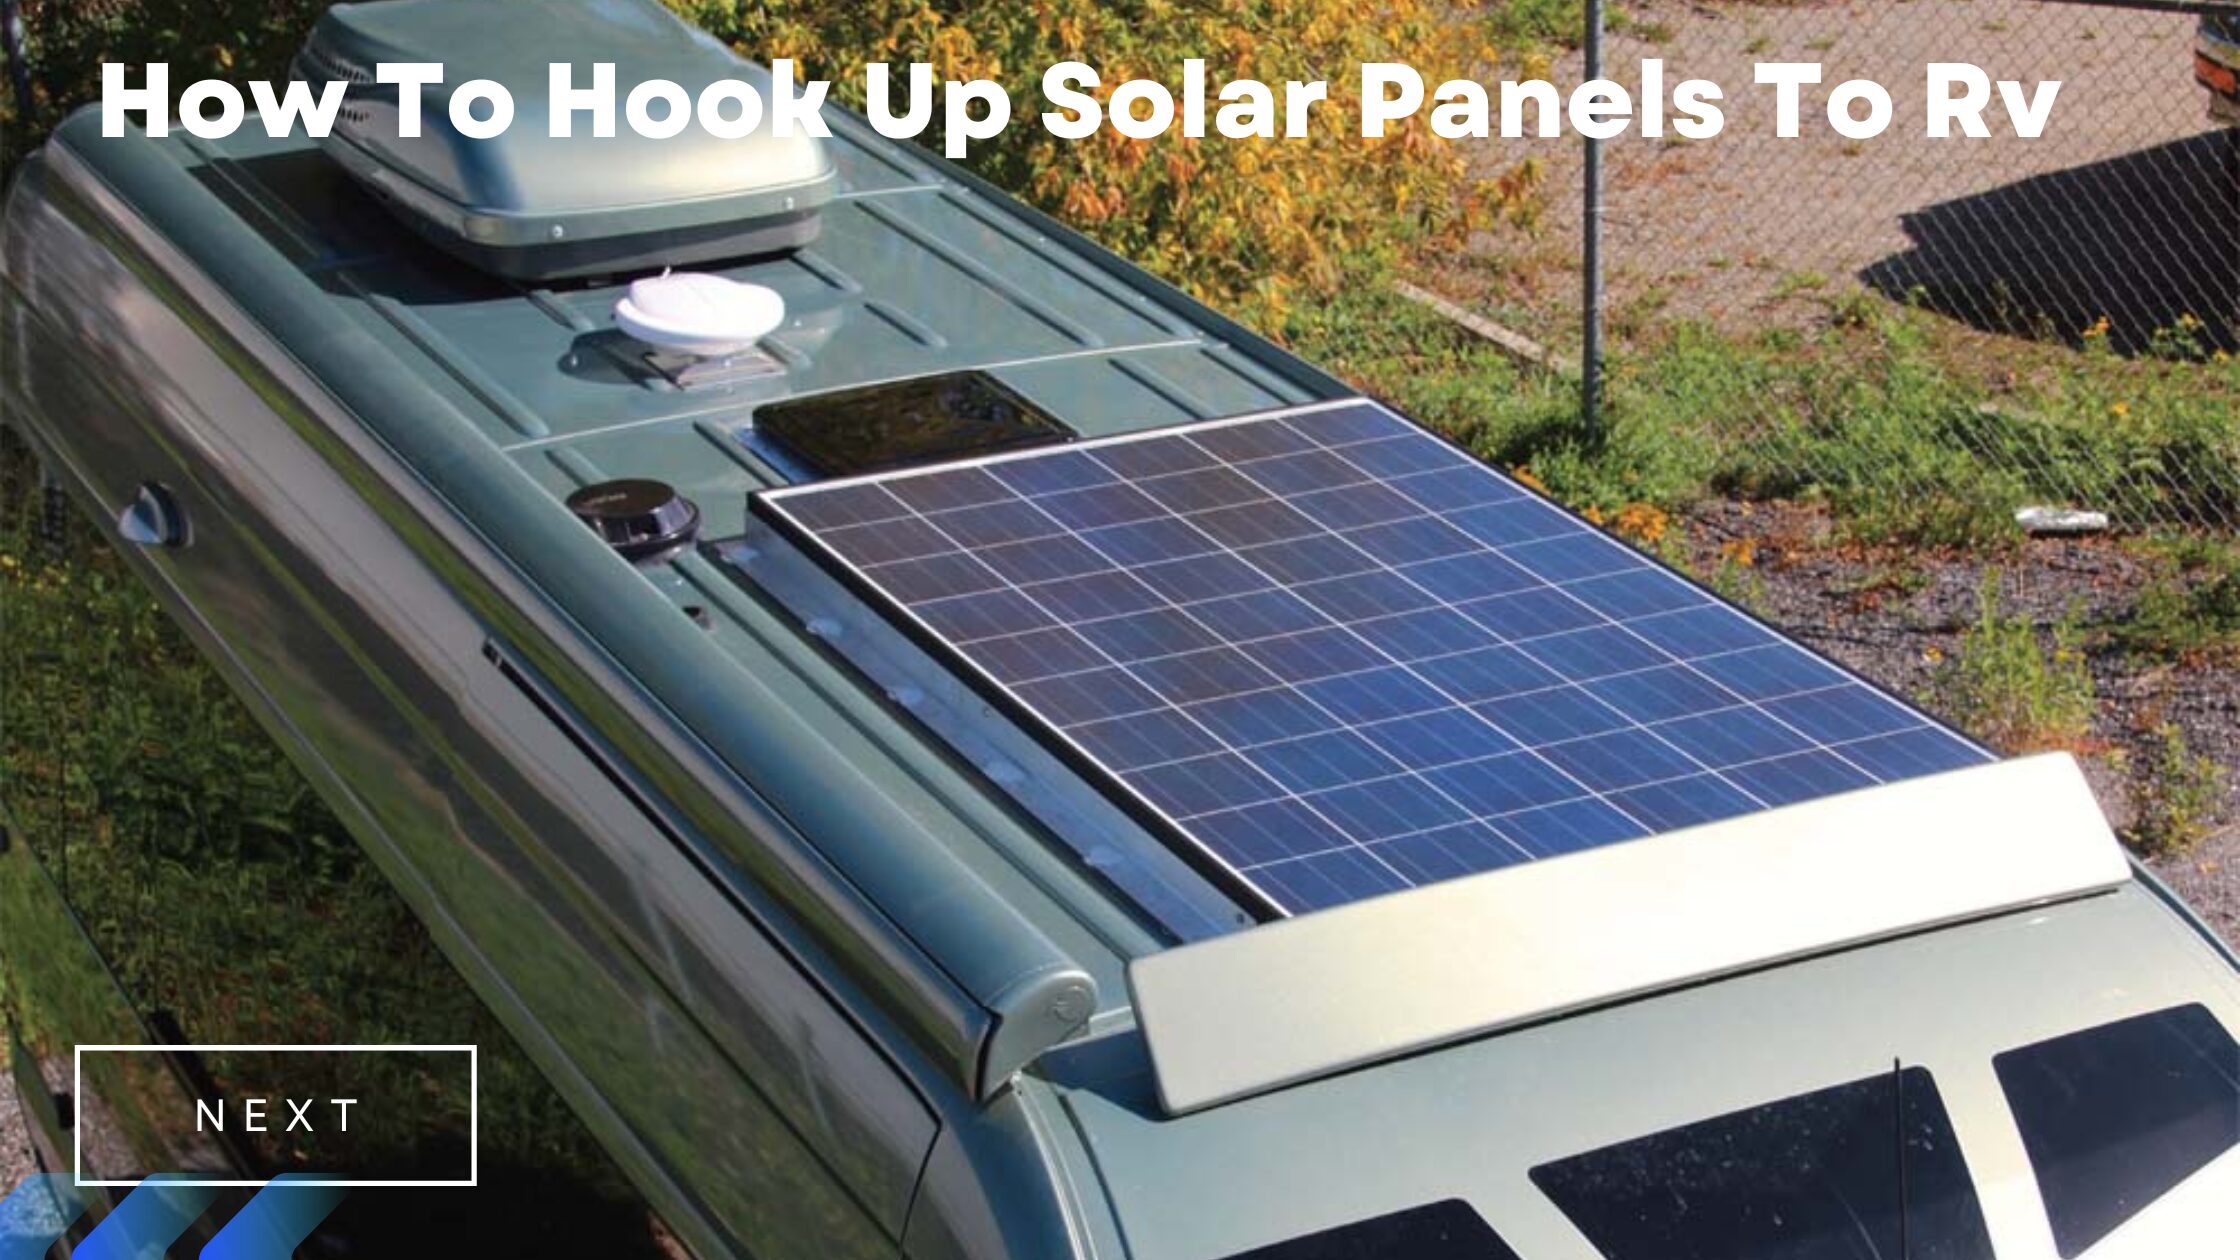 How To Hook Up Solar Panels To Rv